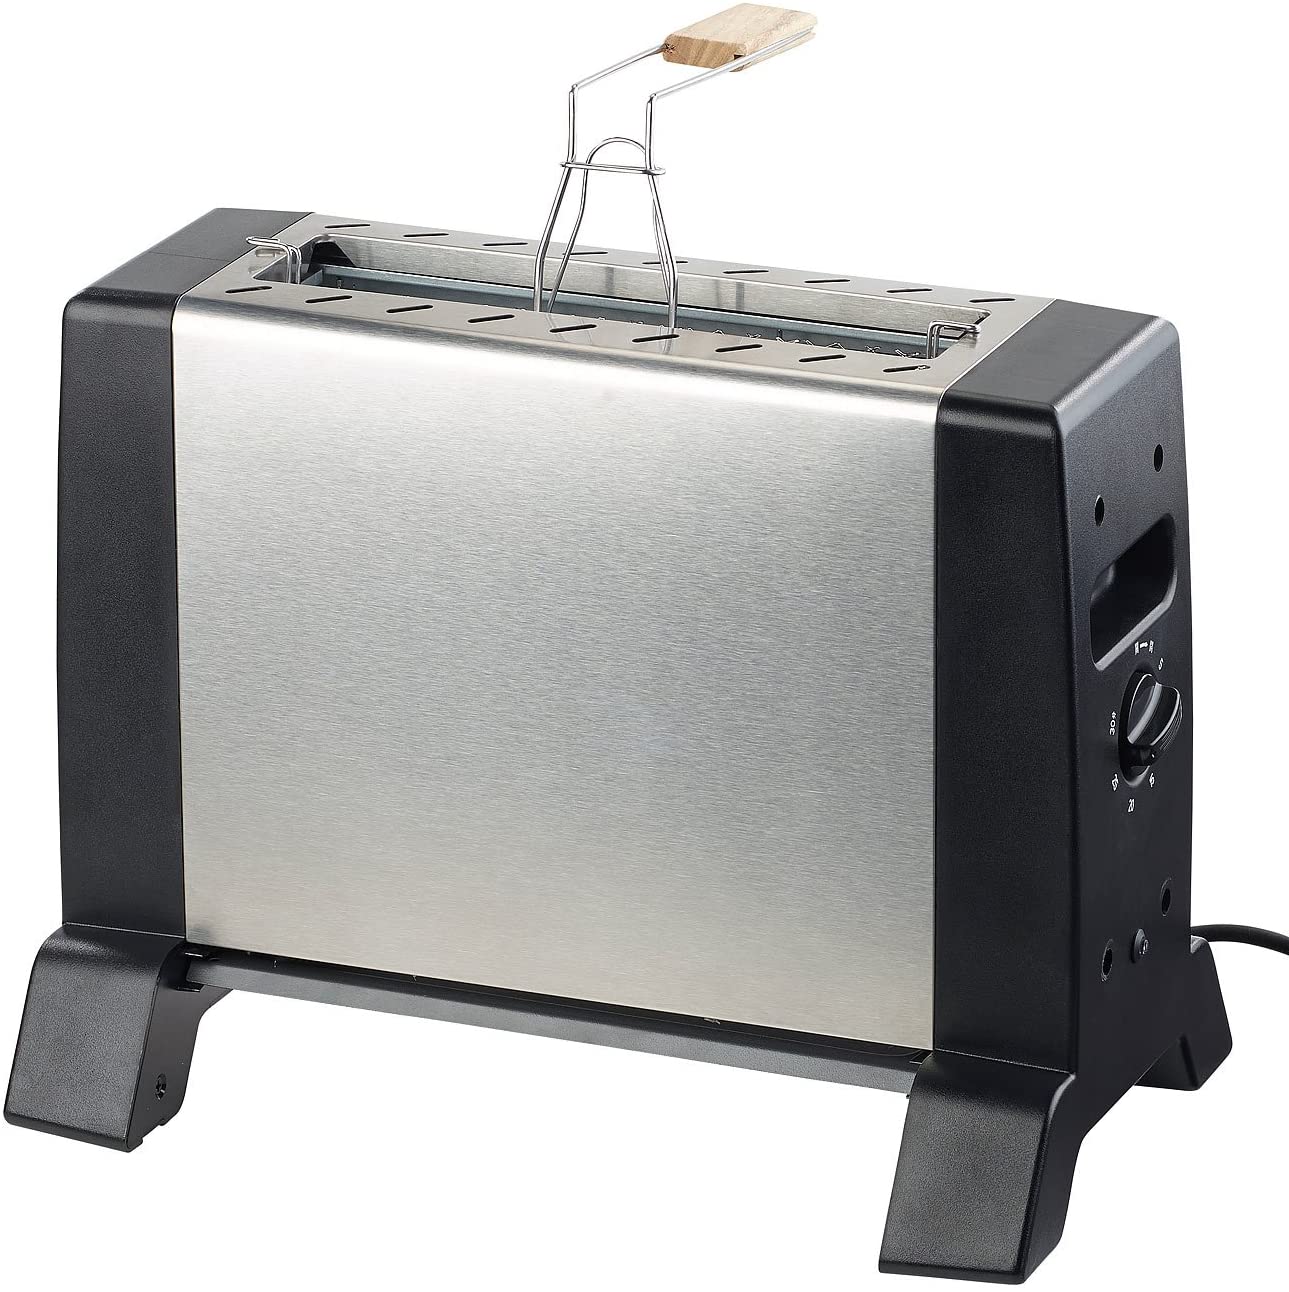 ROSENSTEIN & SOHNE Rosenstein & Söhne Mini oven: vertical infrared table grill with 24 x 18 cm grill surface and 1,000 watts (infrared grill)